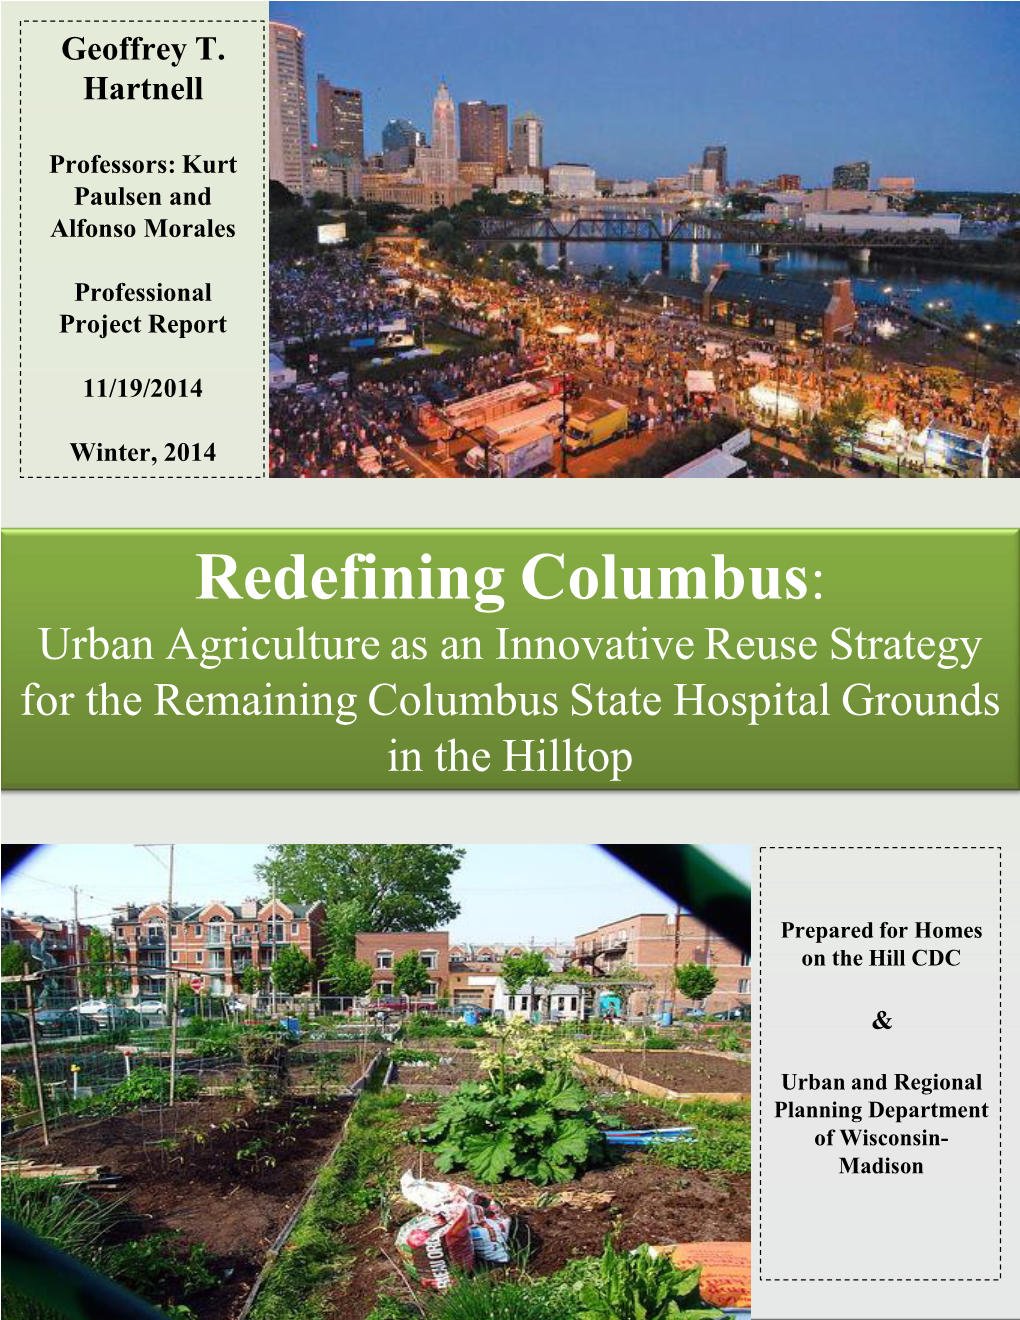 Redefining Columbus: Urban Agriculture As an Innovative Reuse Strategy for the Remaining Columbus State Hospital Grounds in the Hilltop